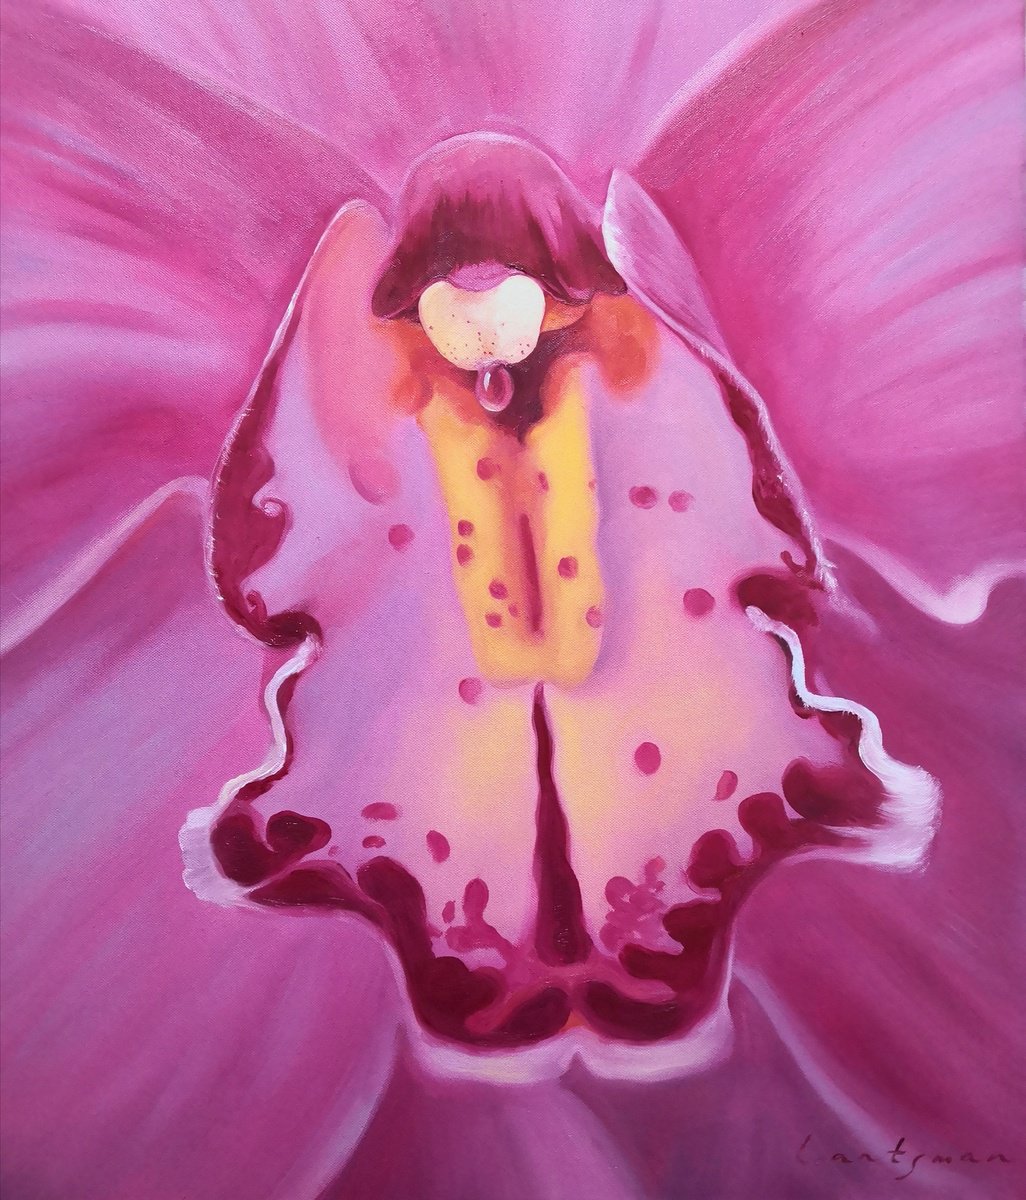 Orchid - a flower of femininity and passion by Jane Lantsman